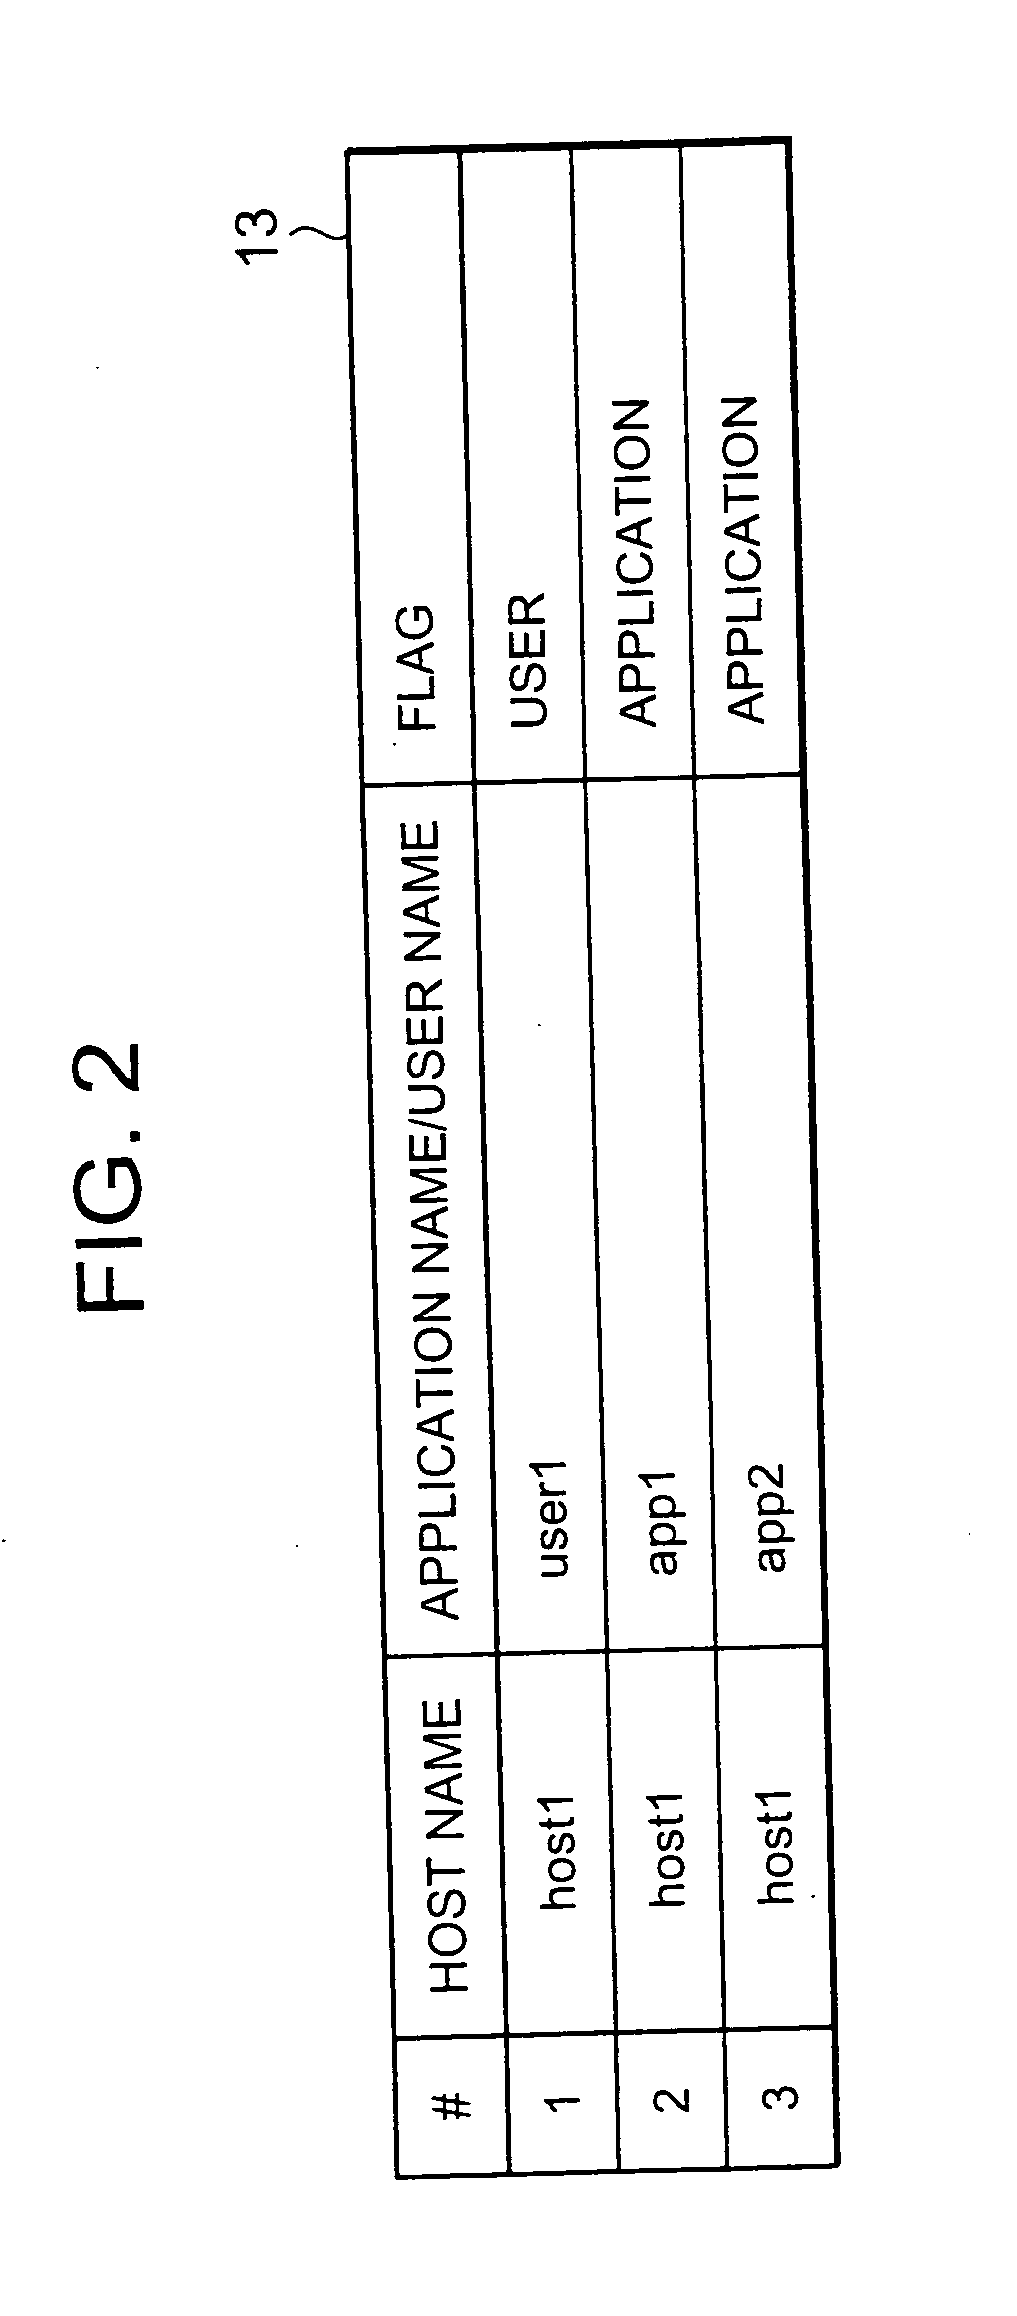 Volume management system and method